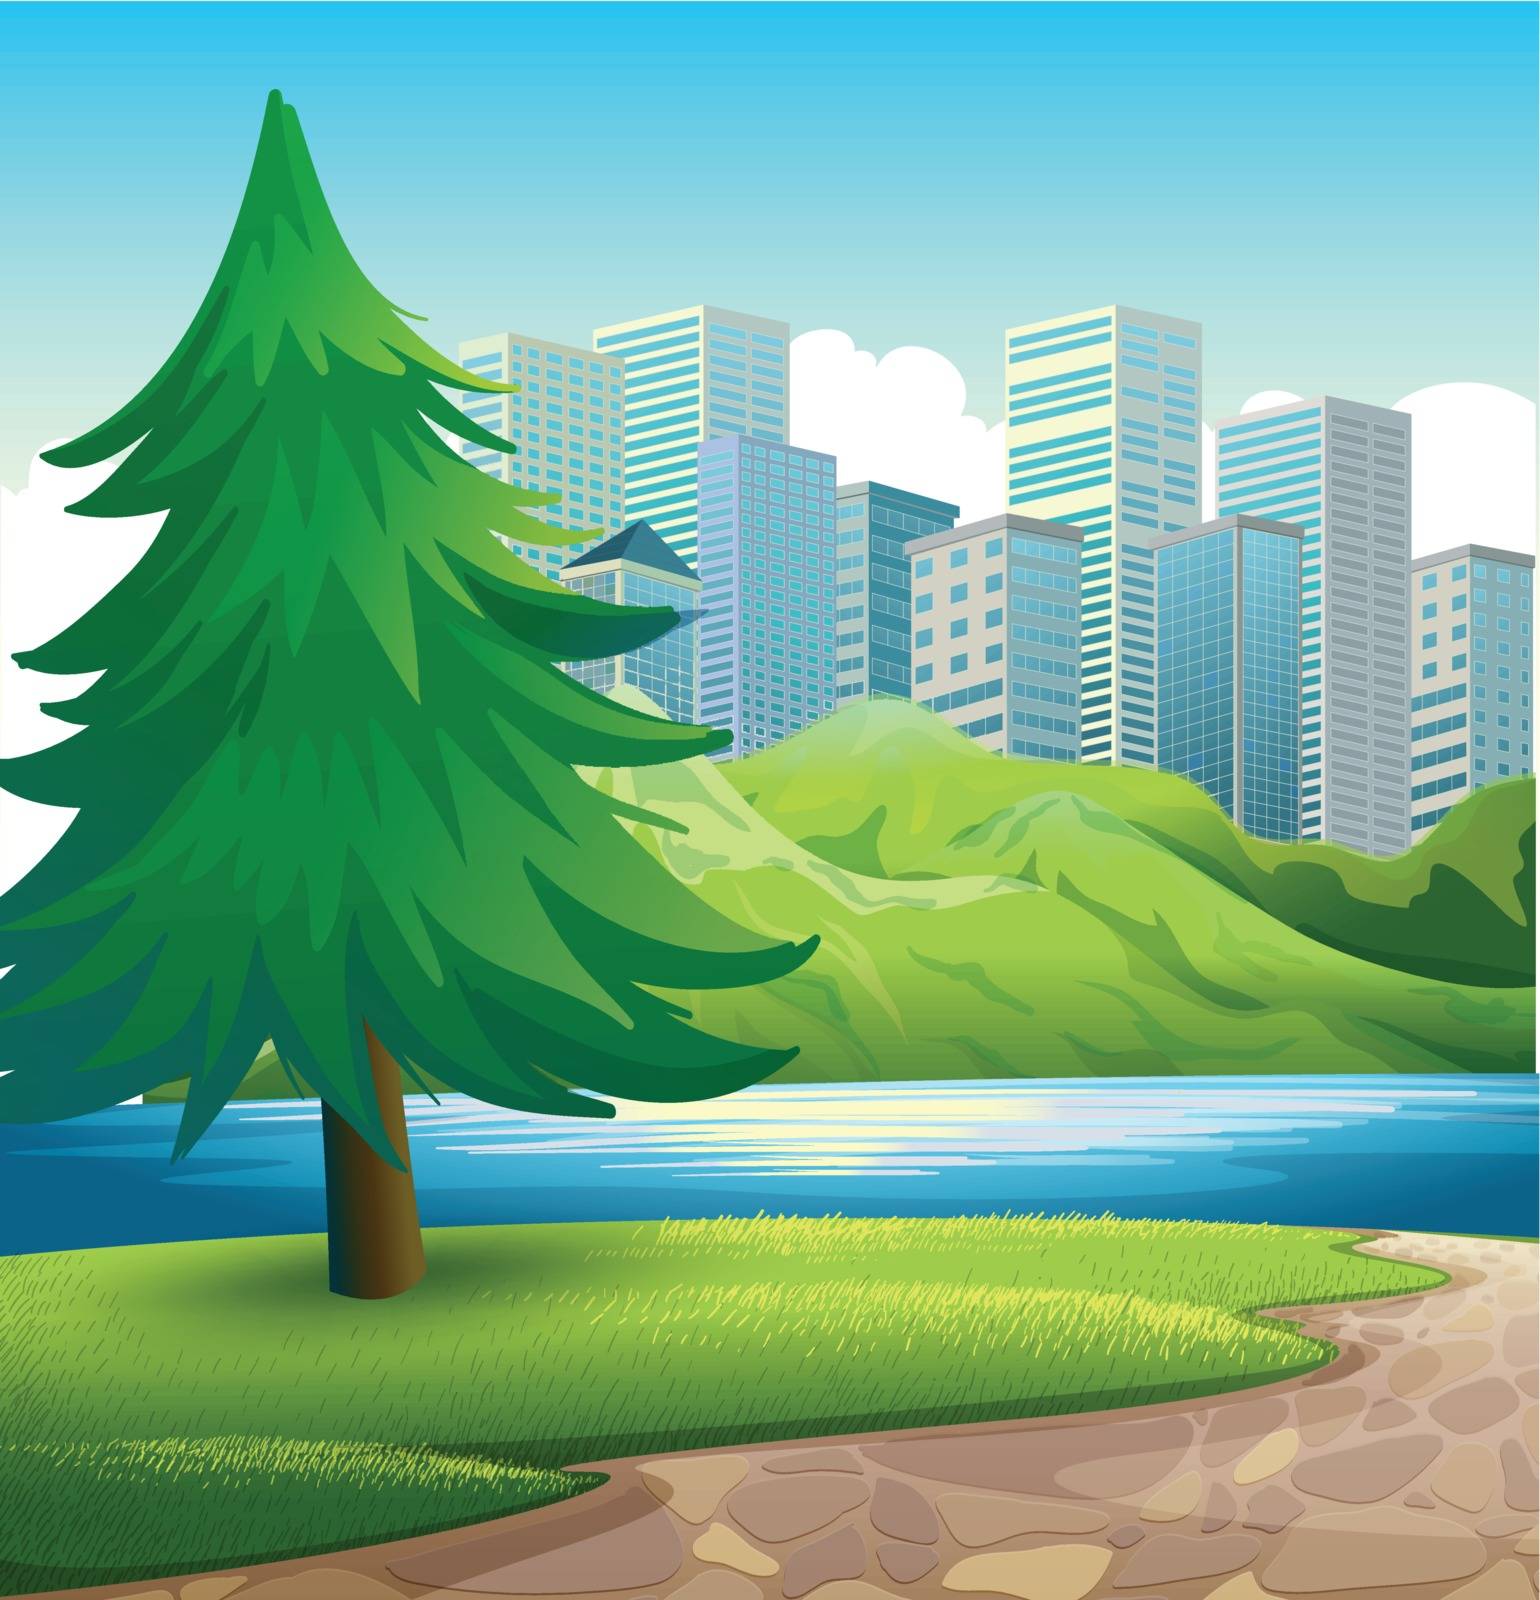 Illustration of a pine tree beside the river across the tall buildings